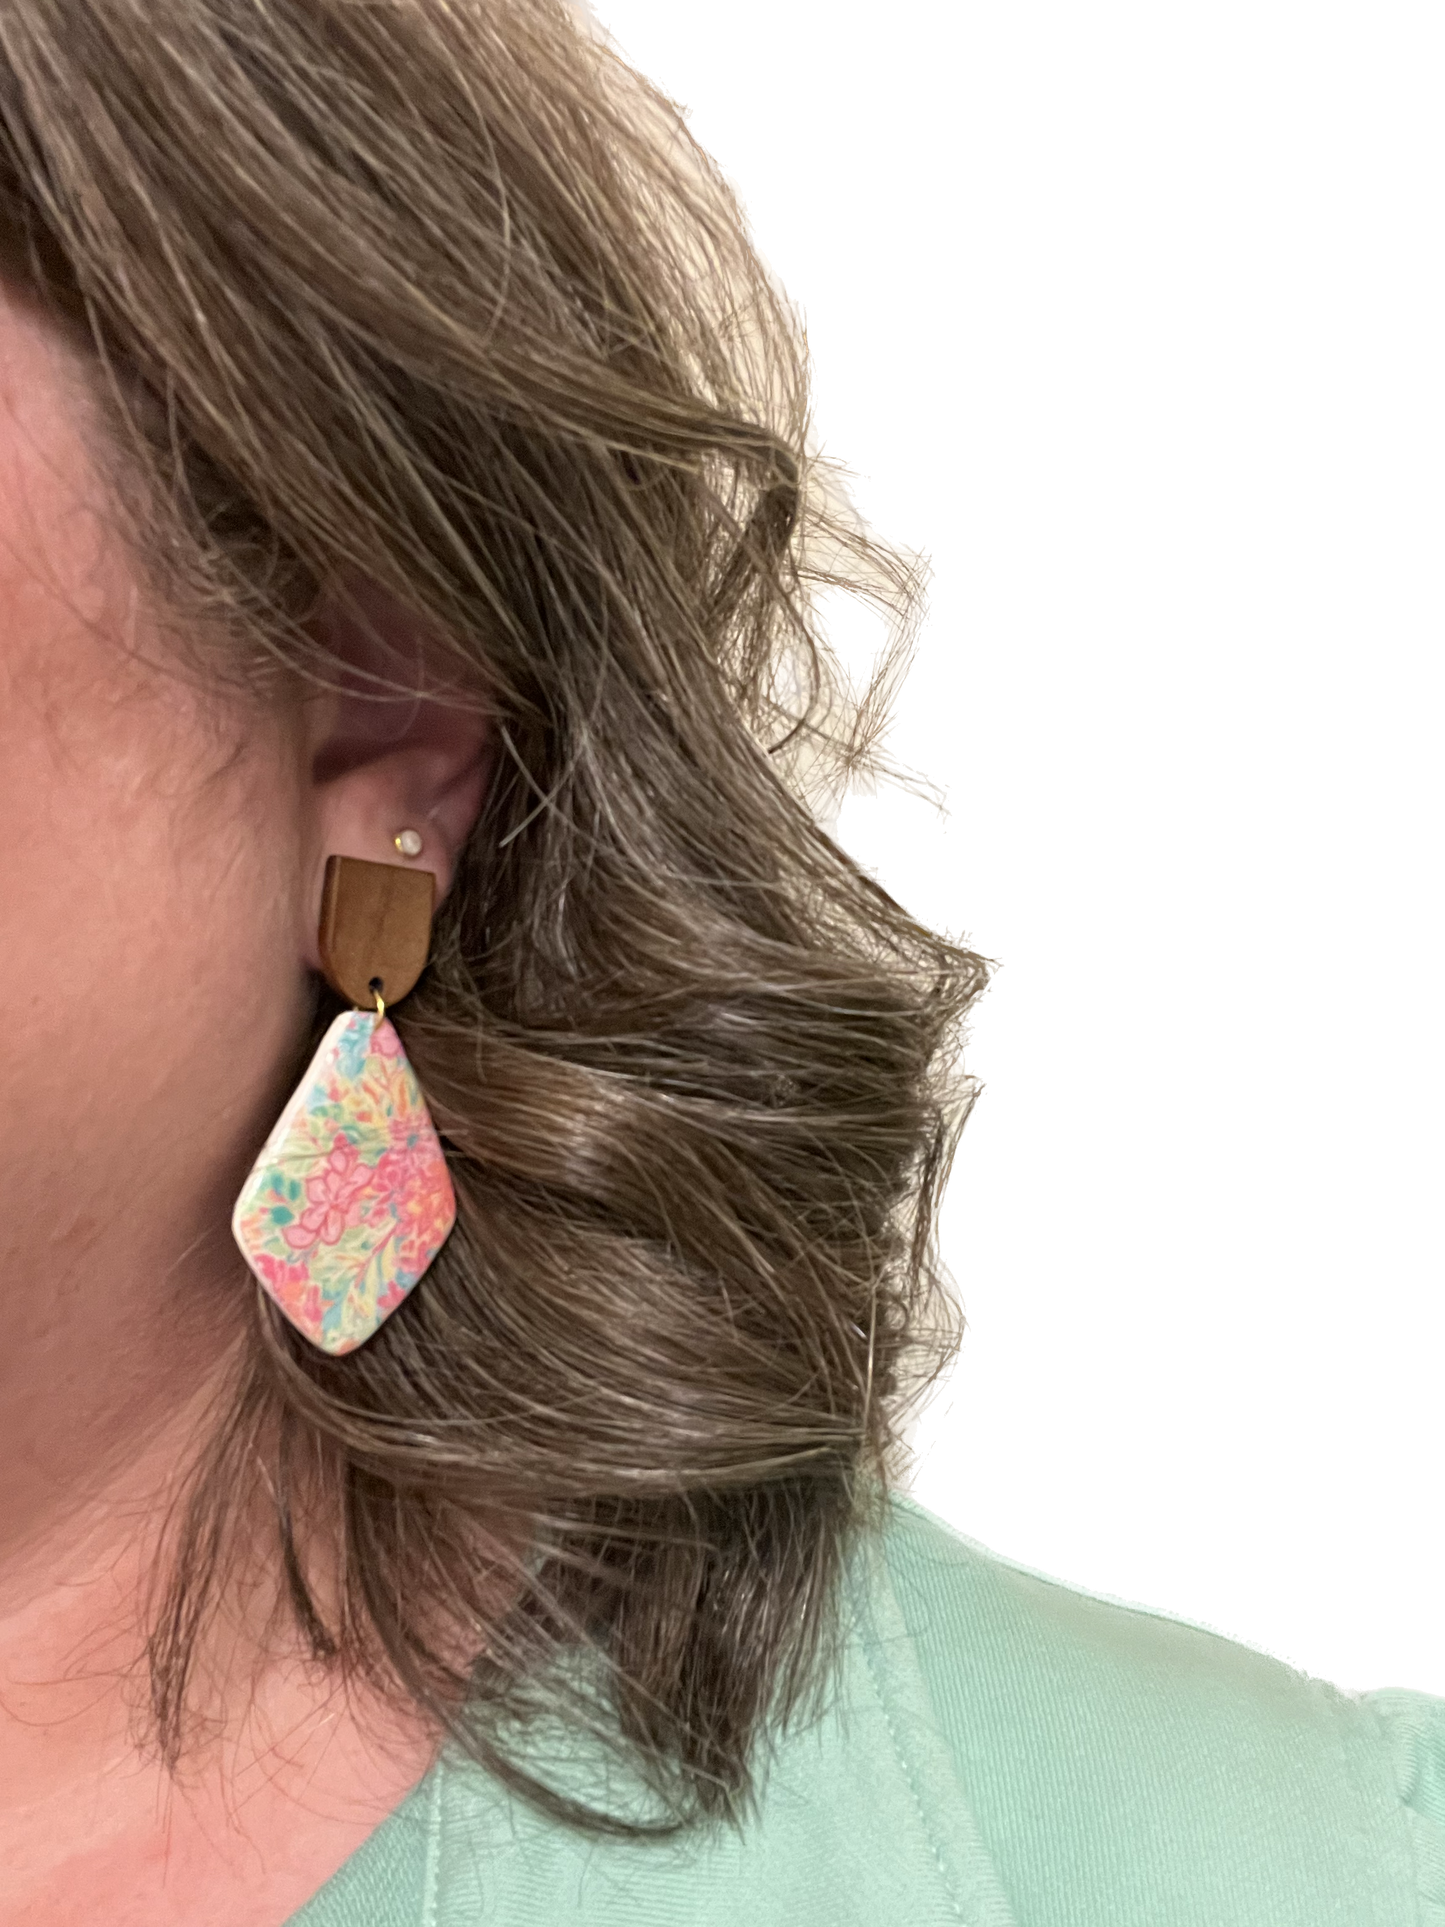 Summer Floral Polymer Clay Earrings